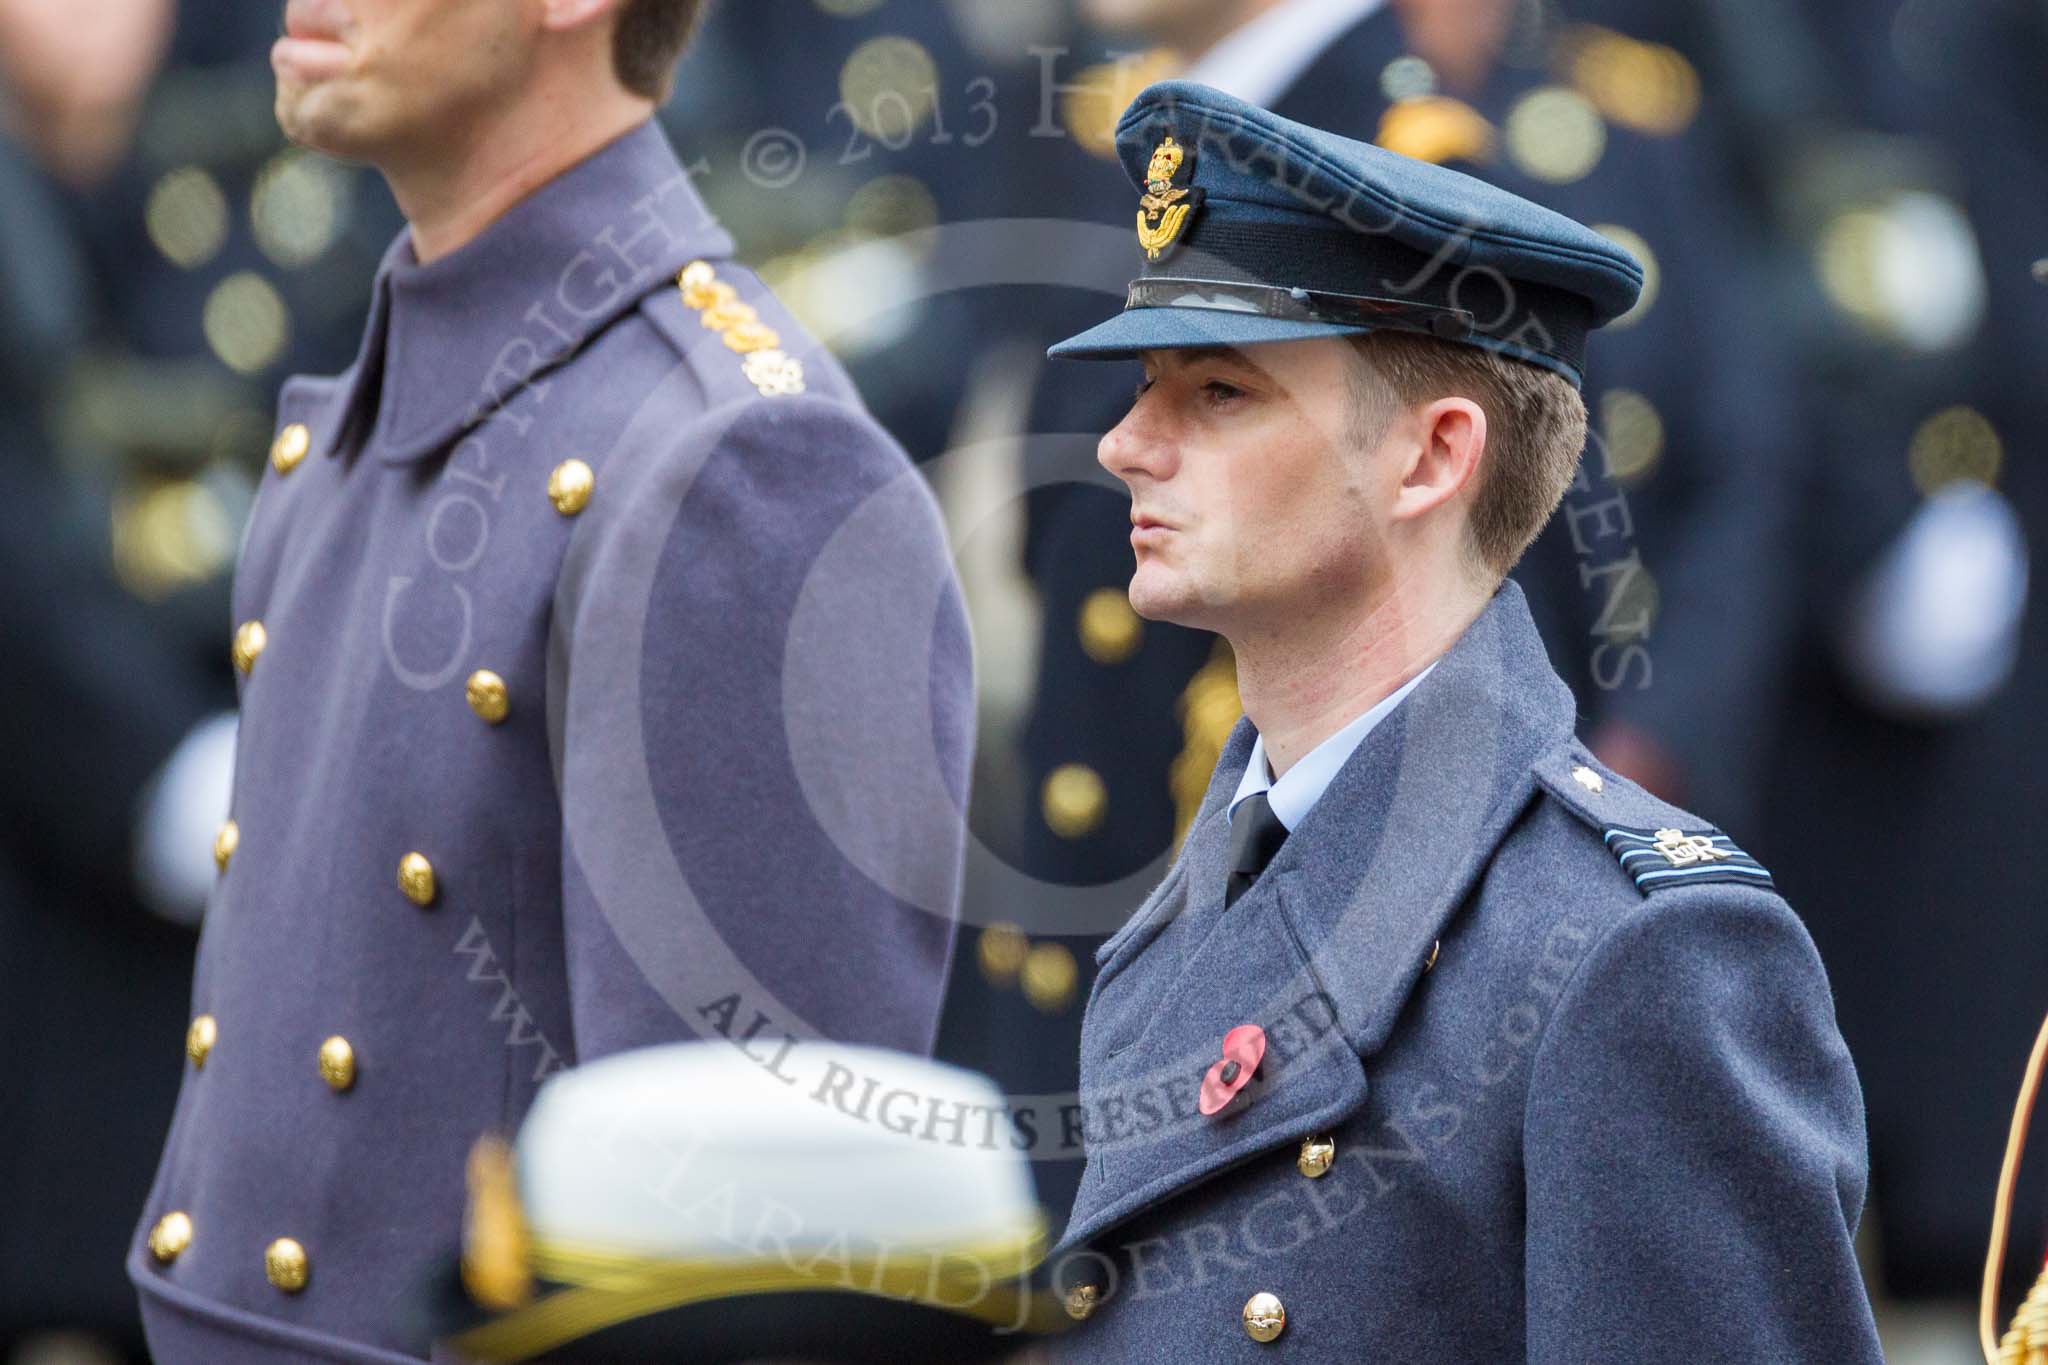 Remembrance Sunday at the Cenotaph 2015: Wing Commander Sam Fletcher, RAF, Equerry to HM The Queen. Image #283, 08 November 2015 11:14 Whitehall, London, UK